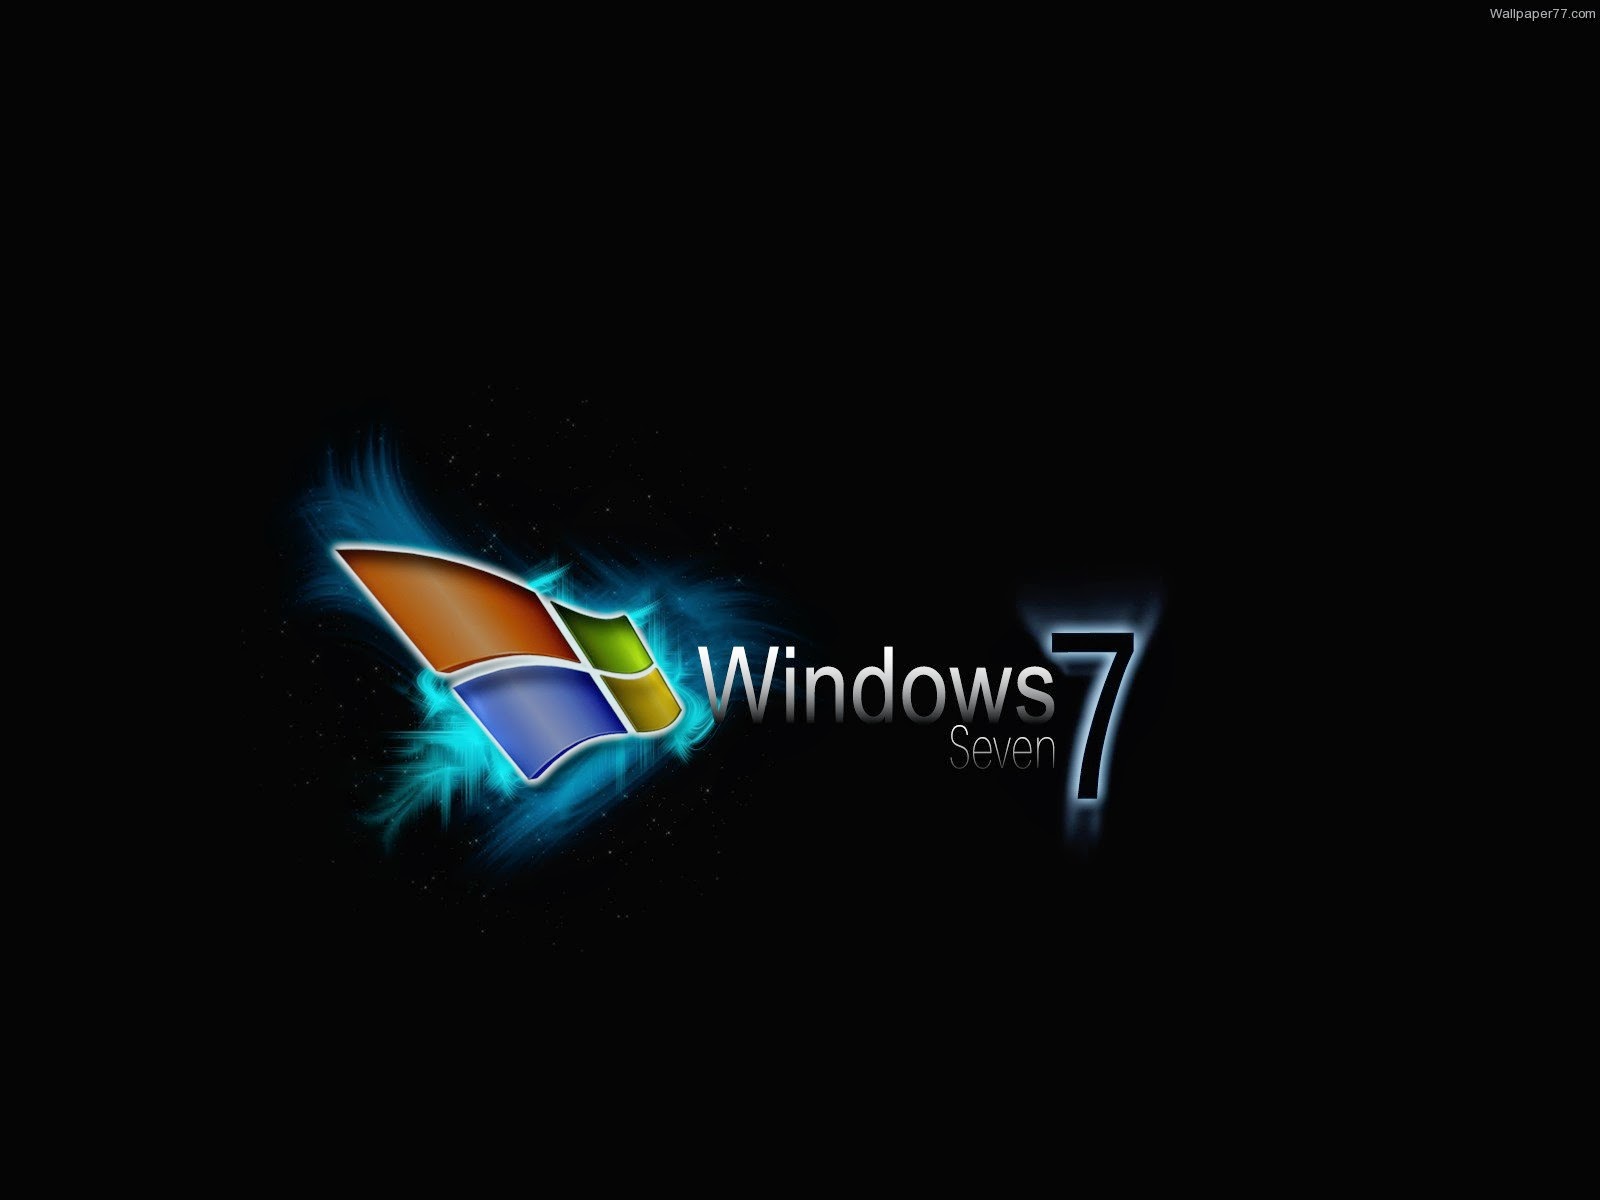 Moving Backgrounds For Windows 7 submited images